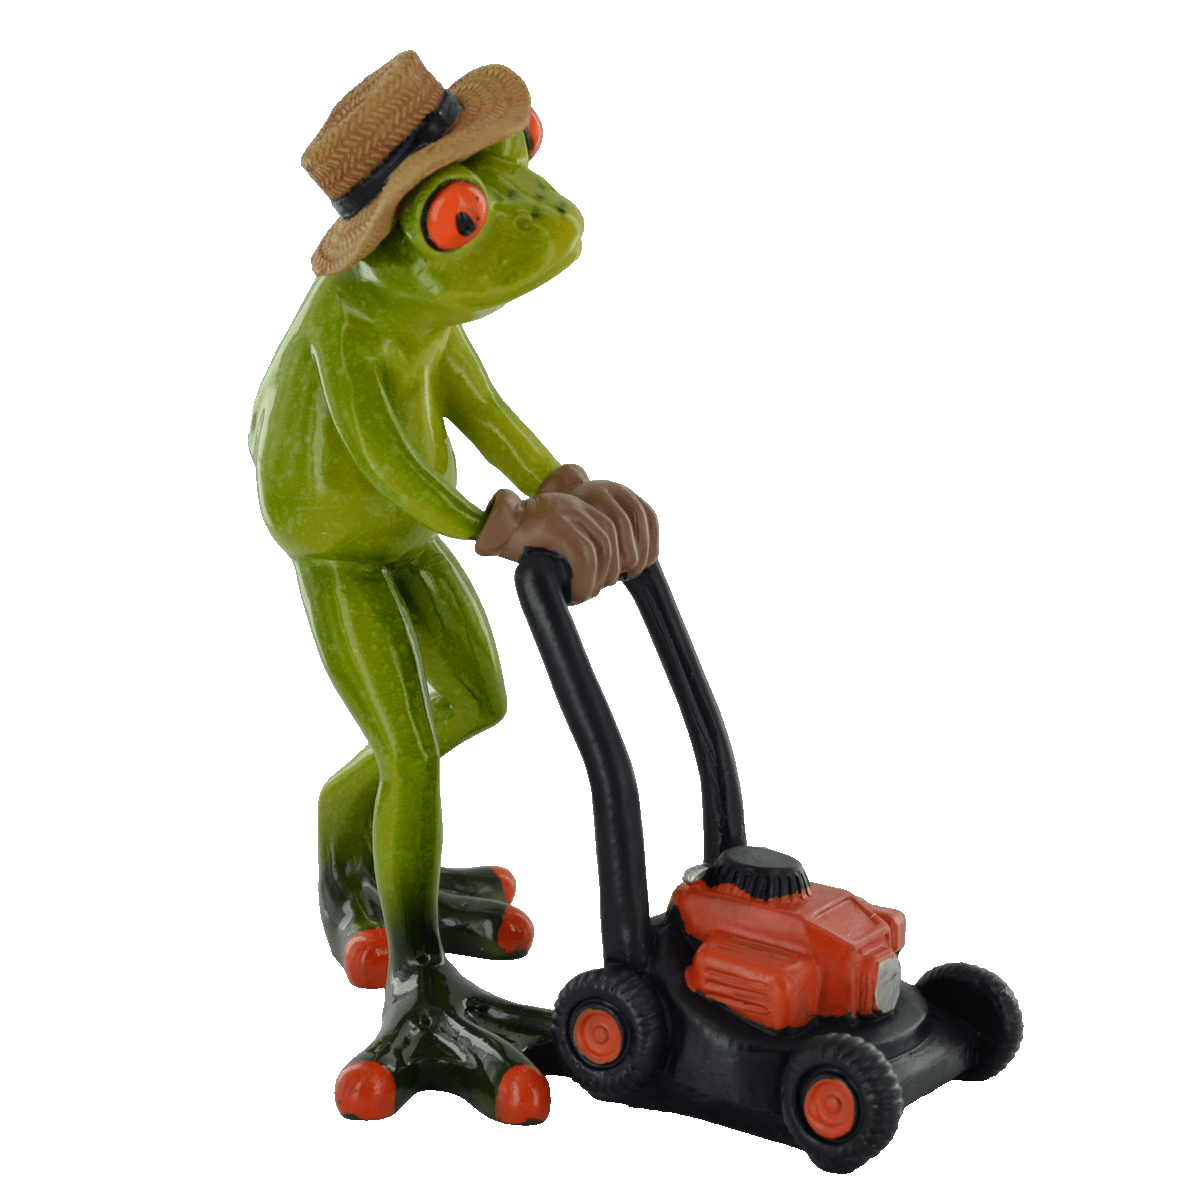 Comical Frogs Gardener With Lawn Mower Small Resin Figurine